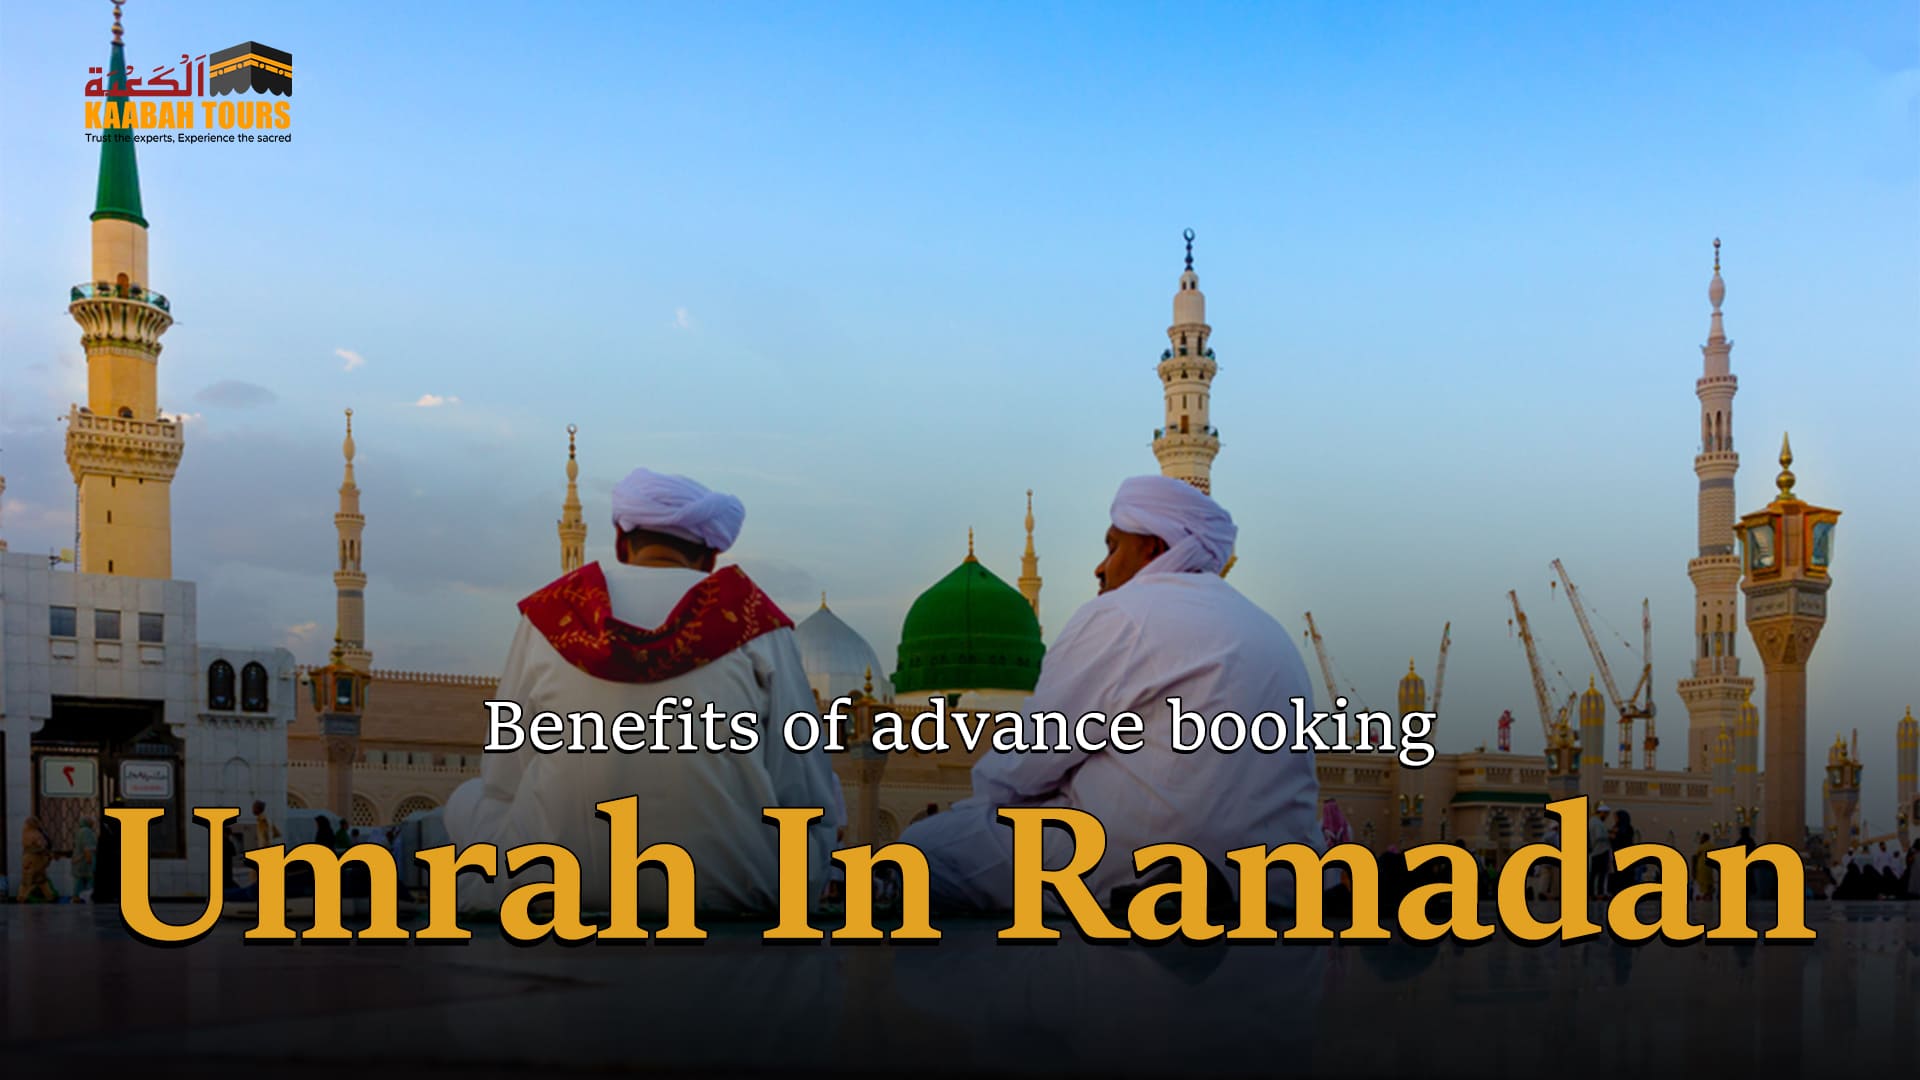 Umrah Packages for Ramadan in Advance